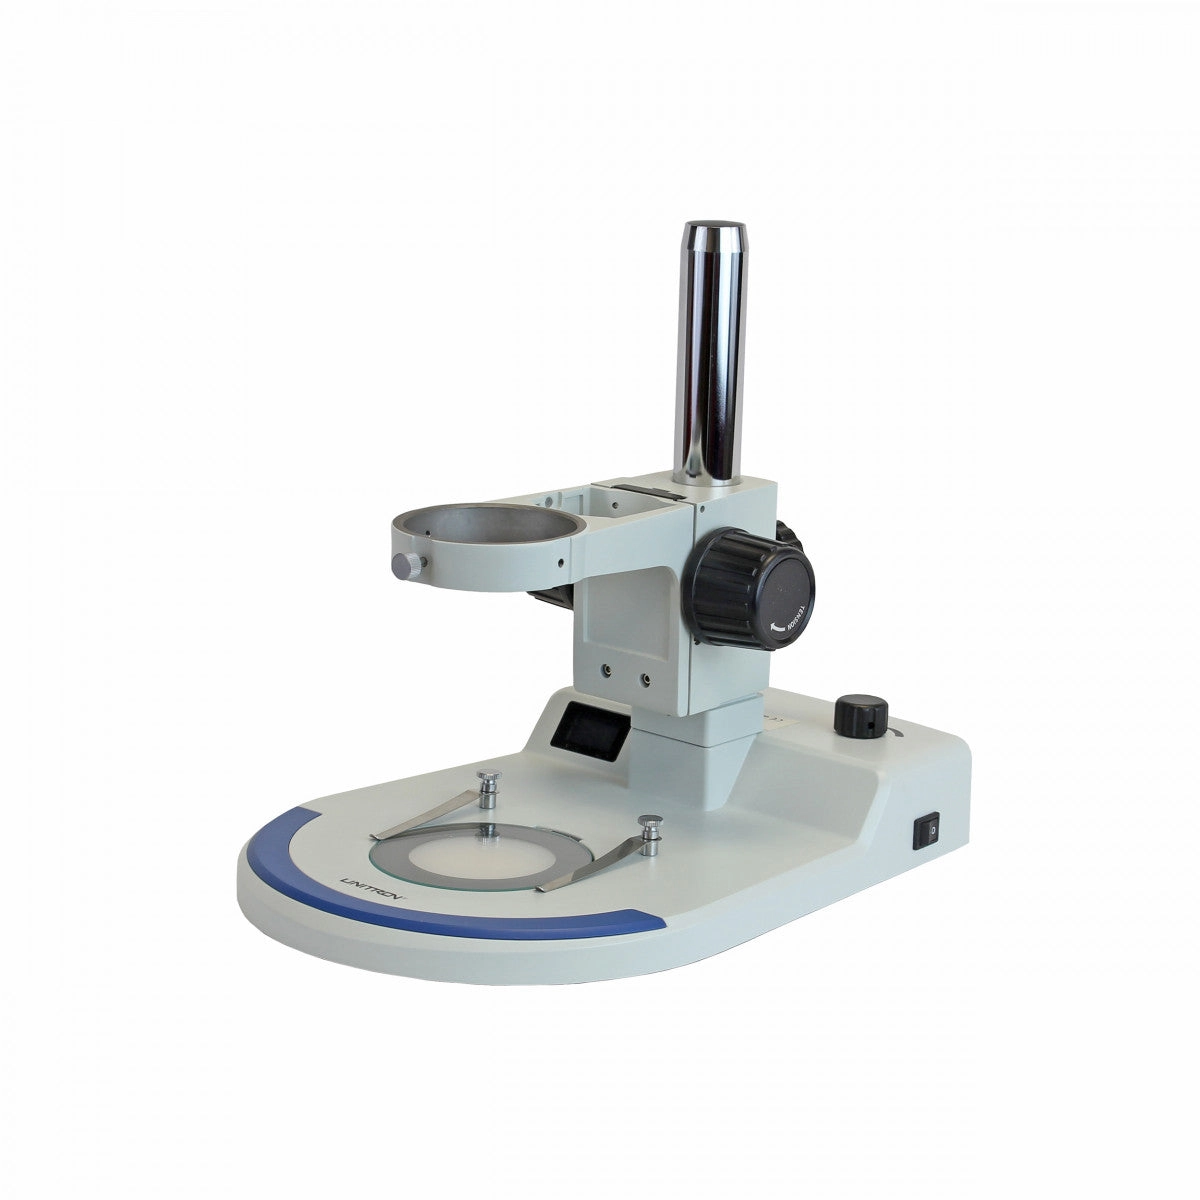 Accu-Scope LED Stereoscope Stand with focus mount